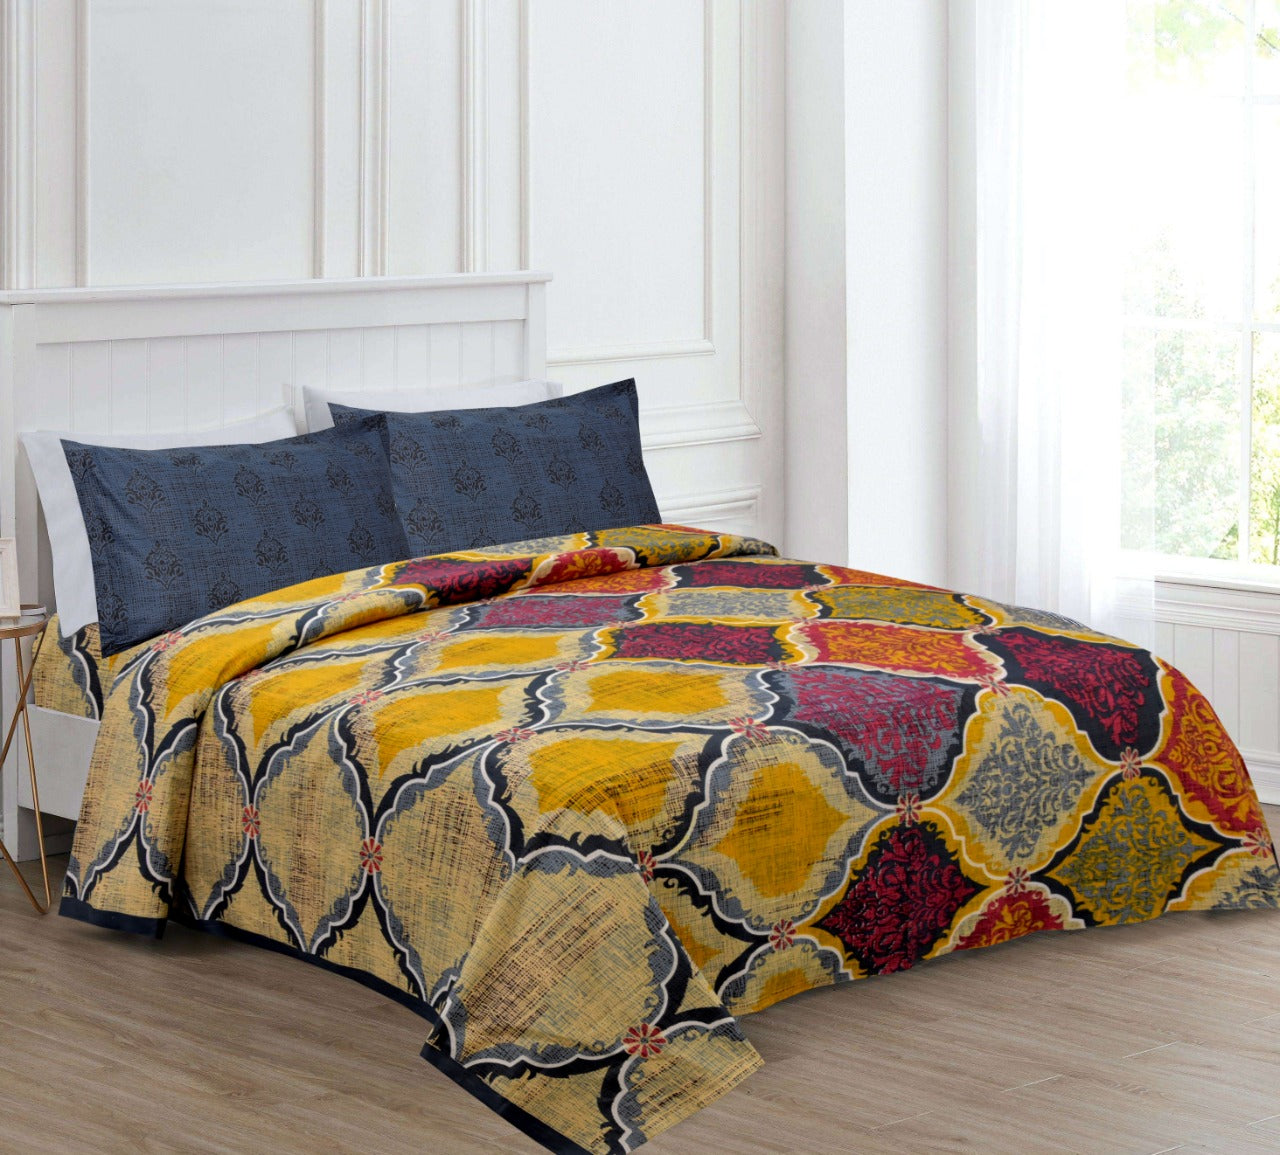 Wanderlust Premium | Queen Size 90 x 100 in | 100% Pure Cotton | Double Bedsheet with 2 Pillow Covers (Dual Tone Design)